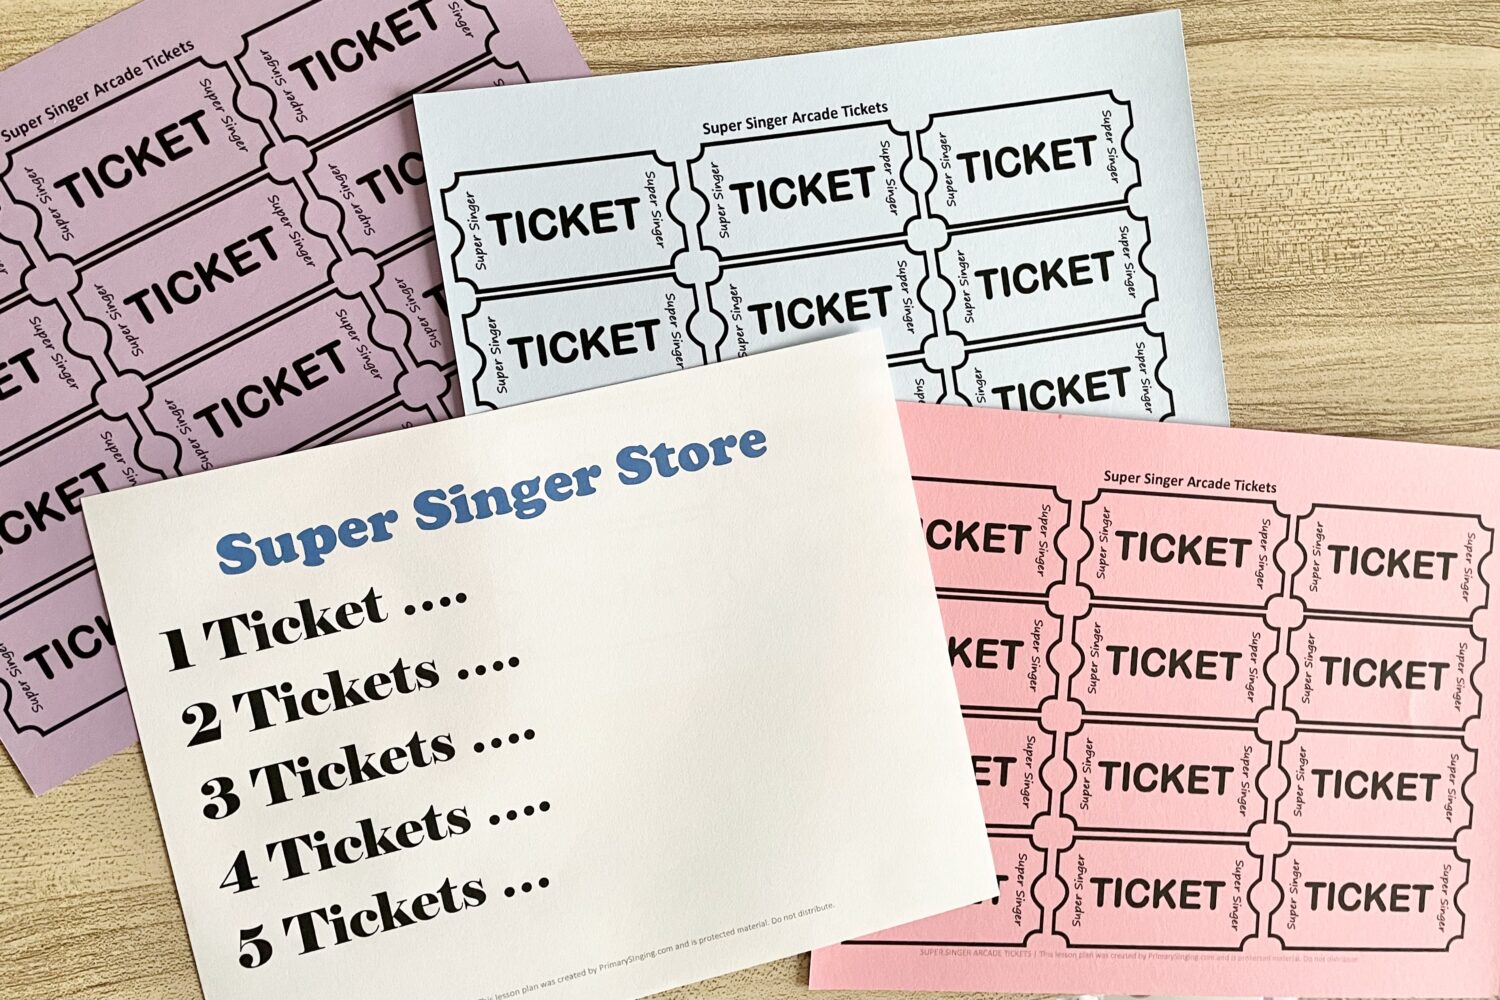 Primary Super Singer Arcade Tickets! Pass out tickets during singing time and have the kids redeem their tickets for prizes! Includes printable tickets and song helps for LDS Primary Music Leaders.